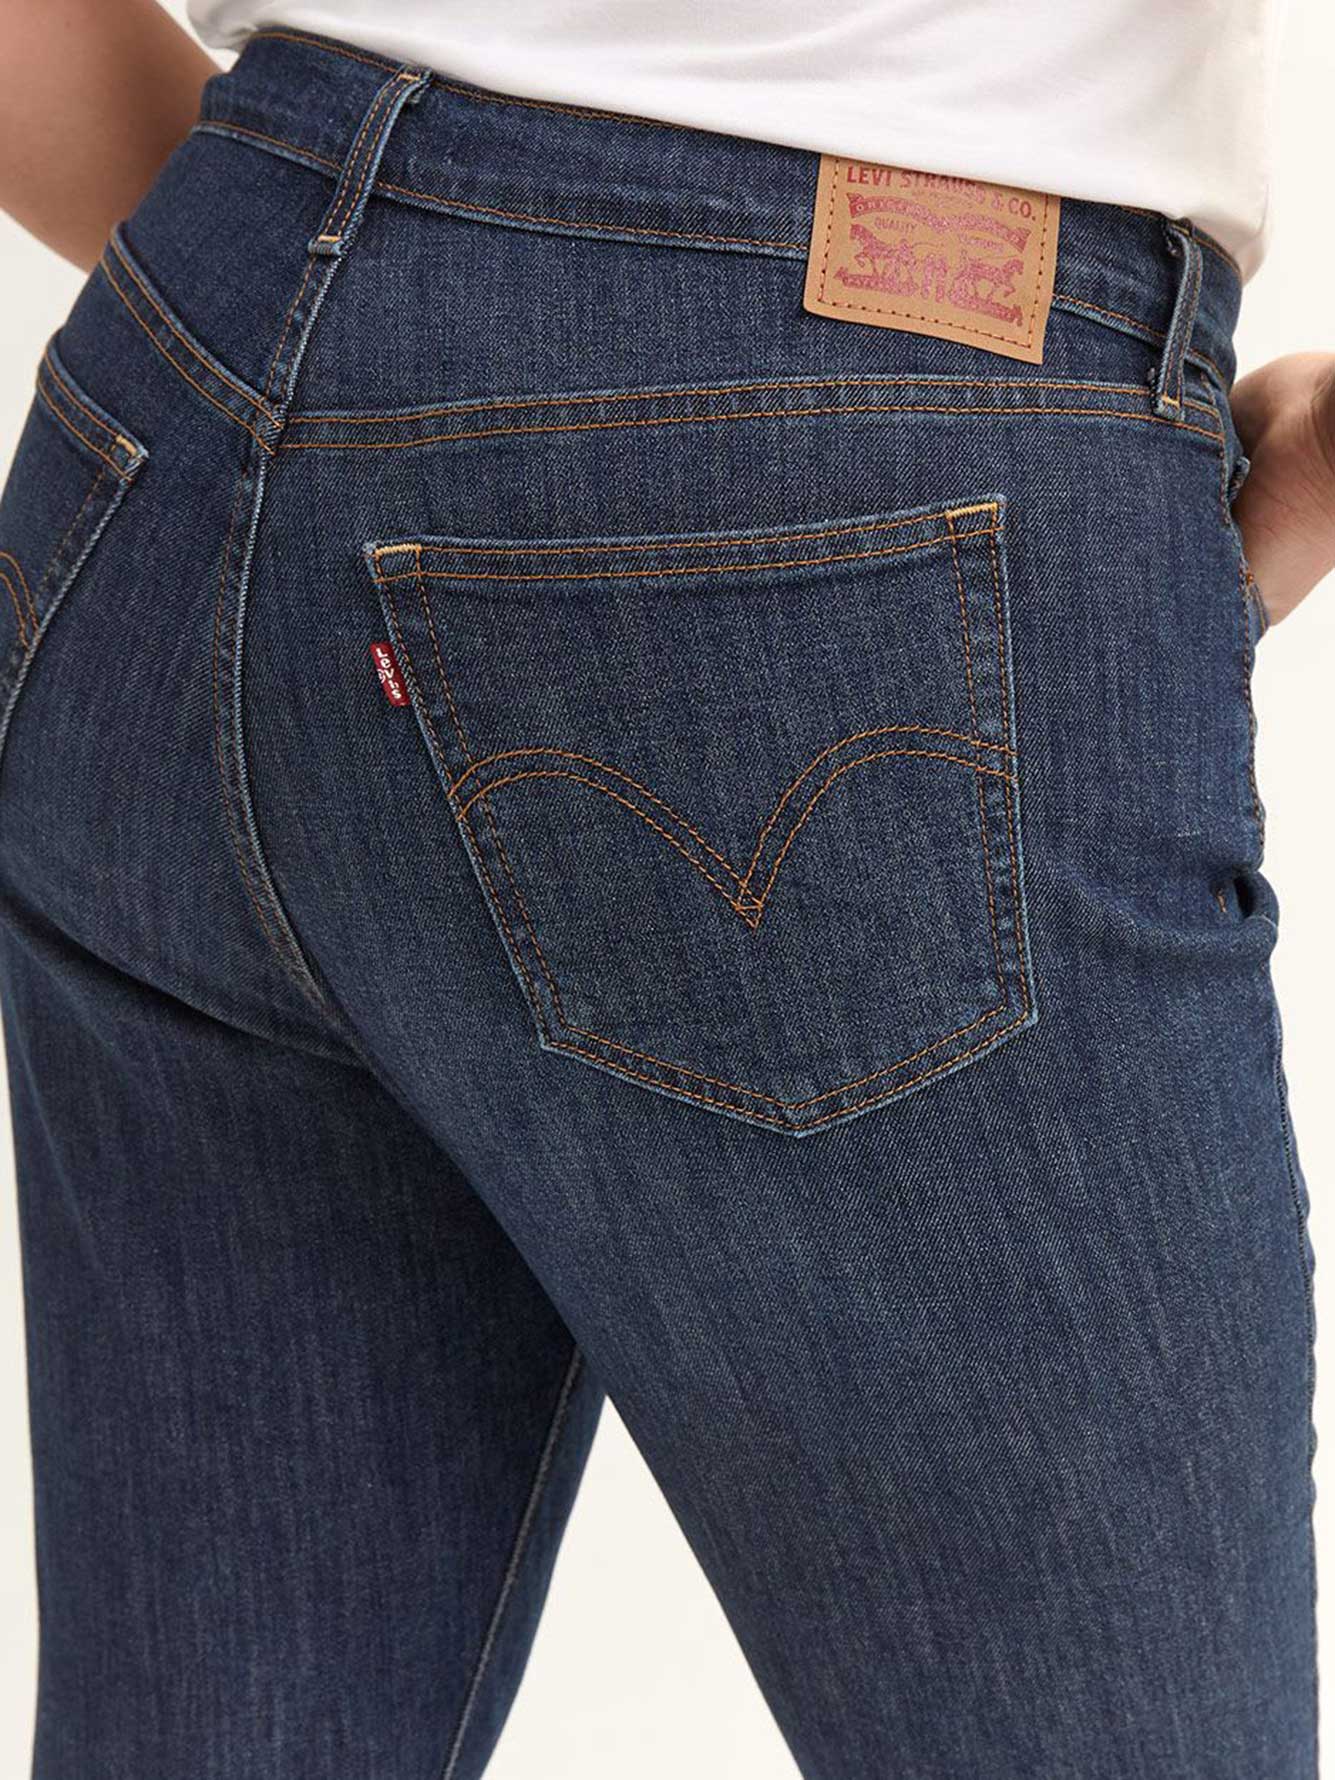 Wedgie From the Block Stretchy Skinny Jean - Levi's | Penningtons